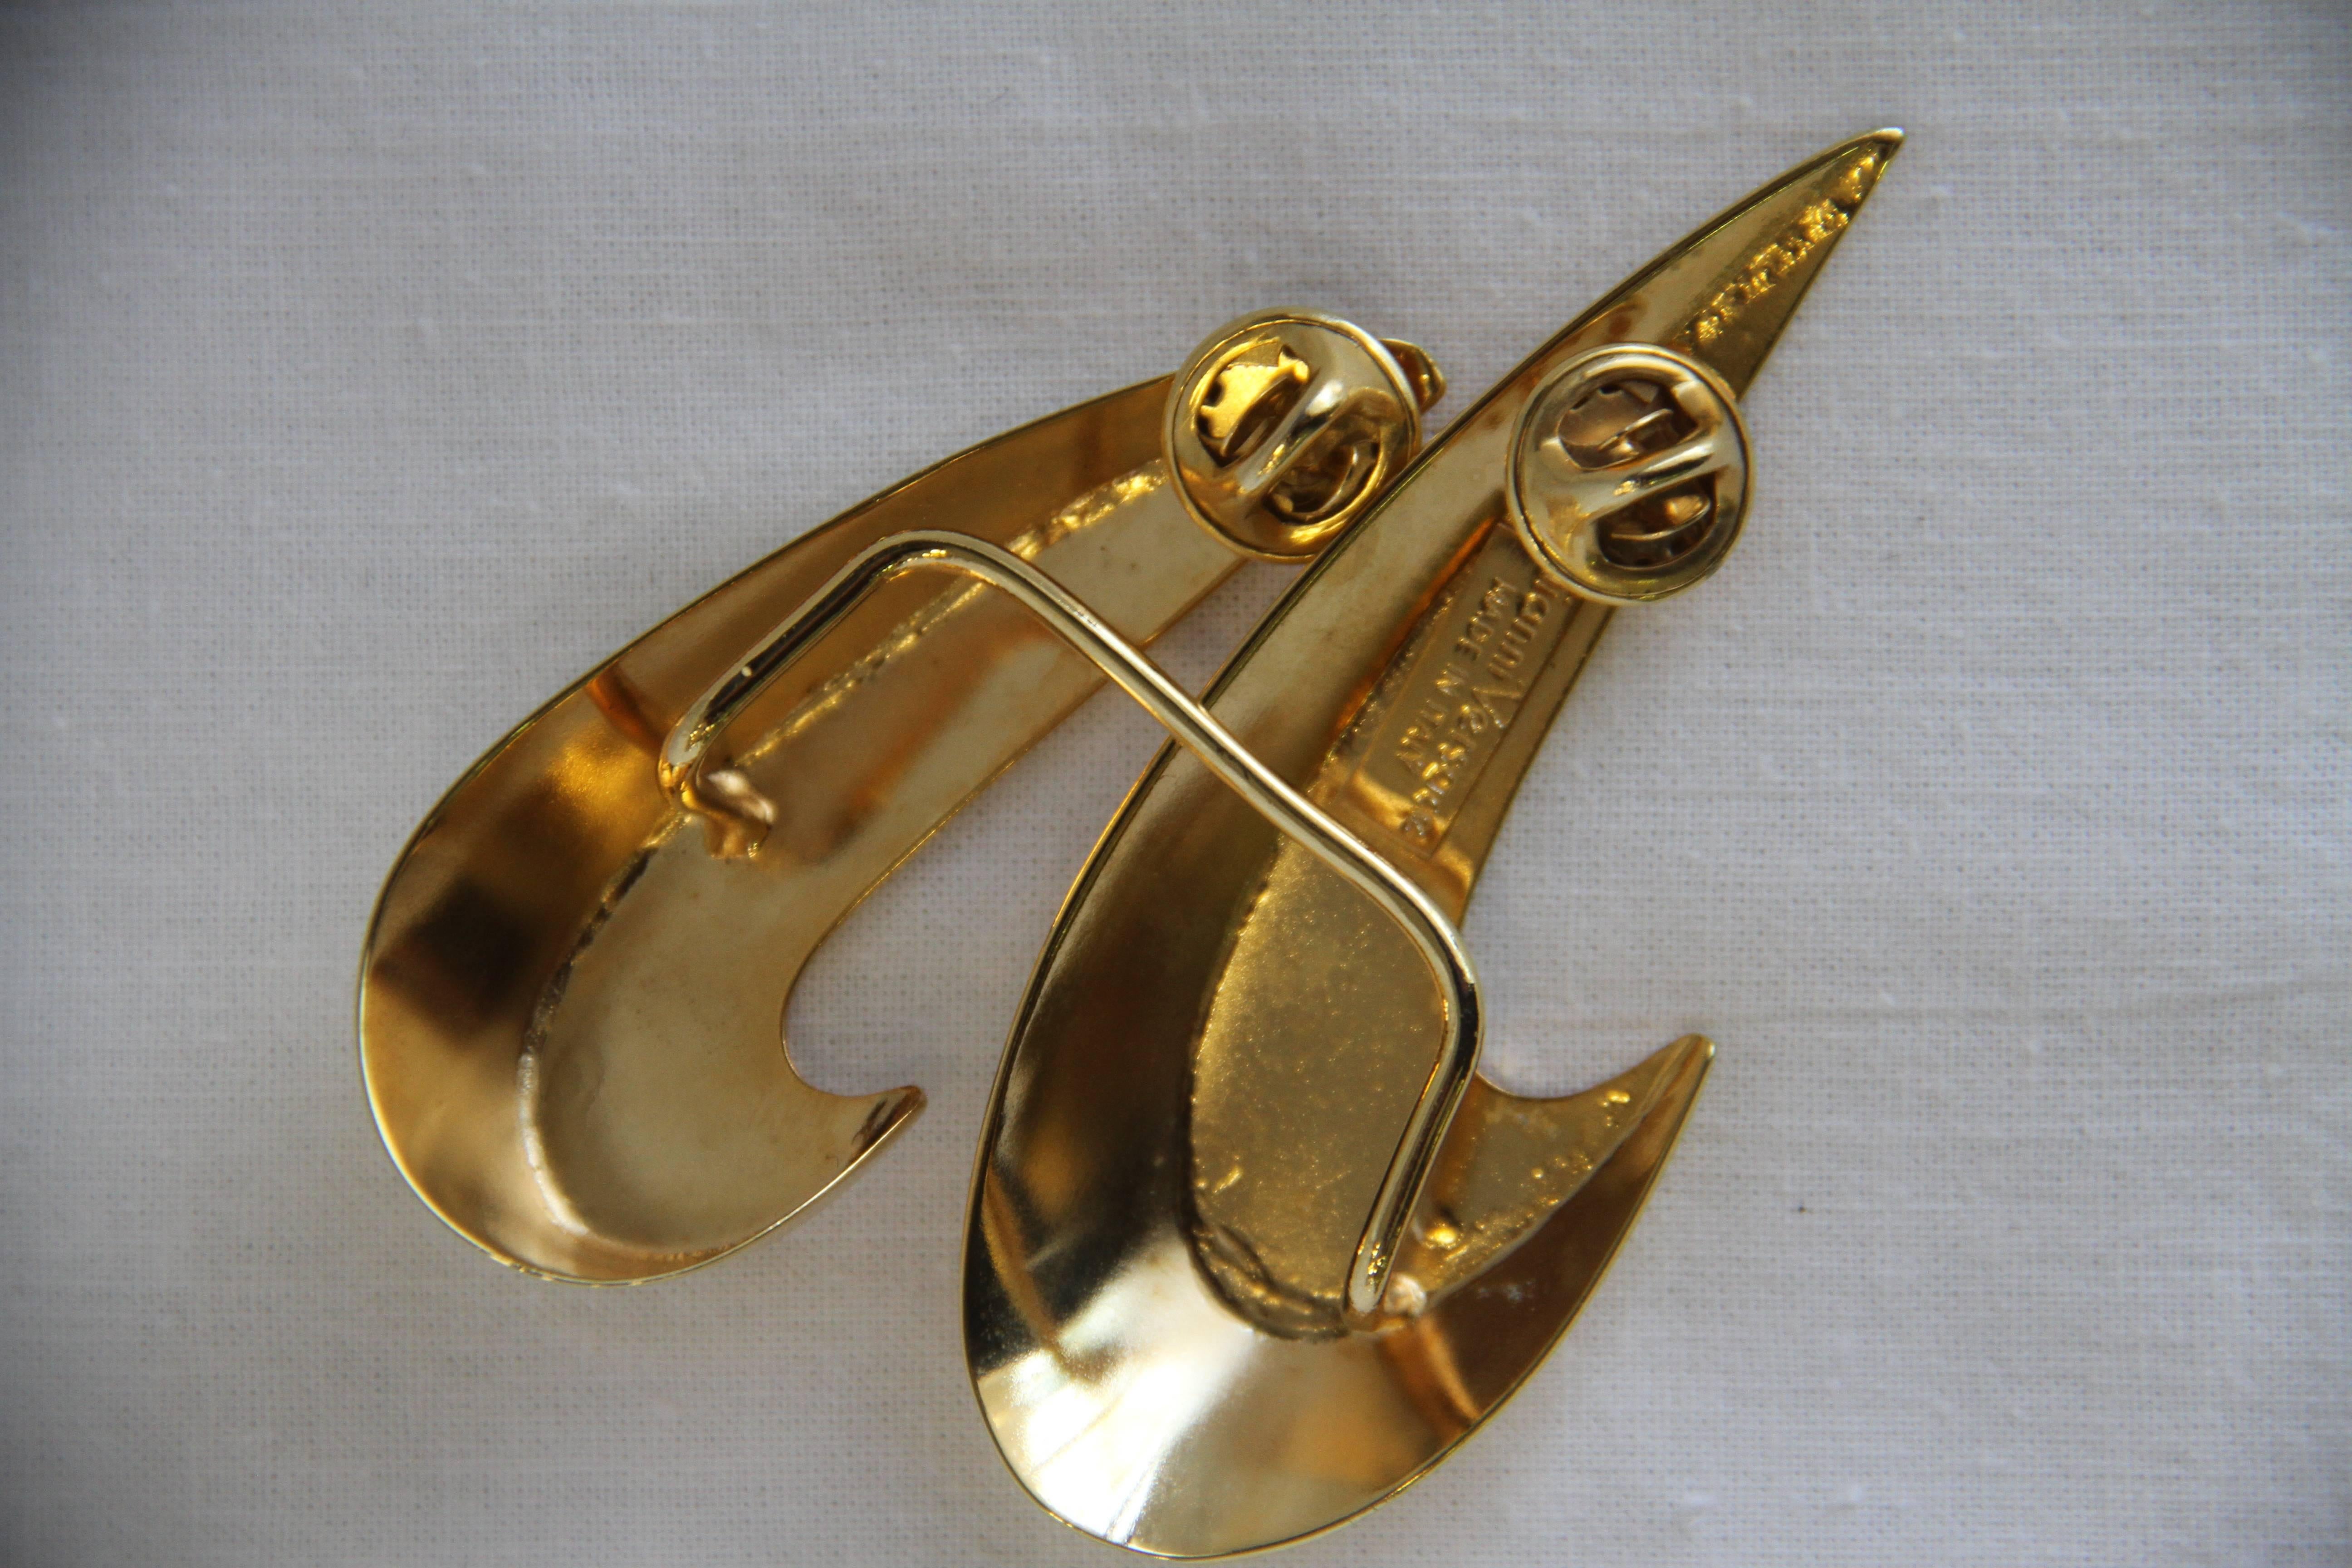 Very rare Gianni Versace Ugo Correani signed pin brooch from the 1980's.